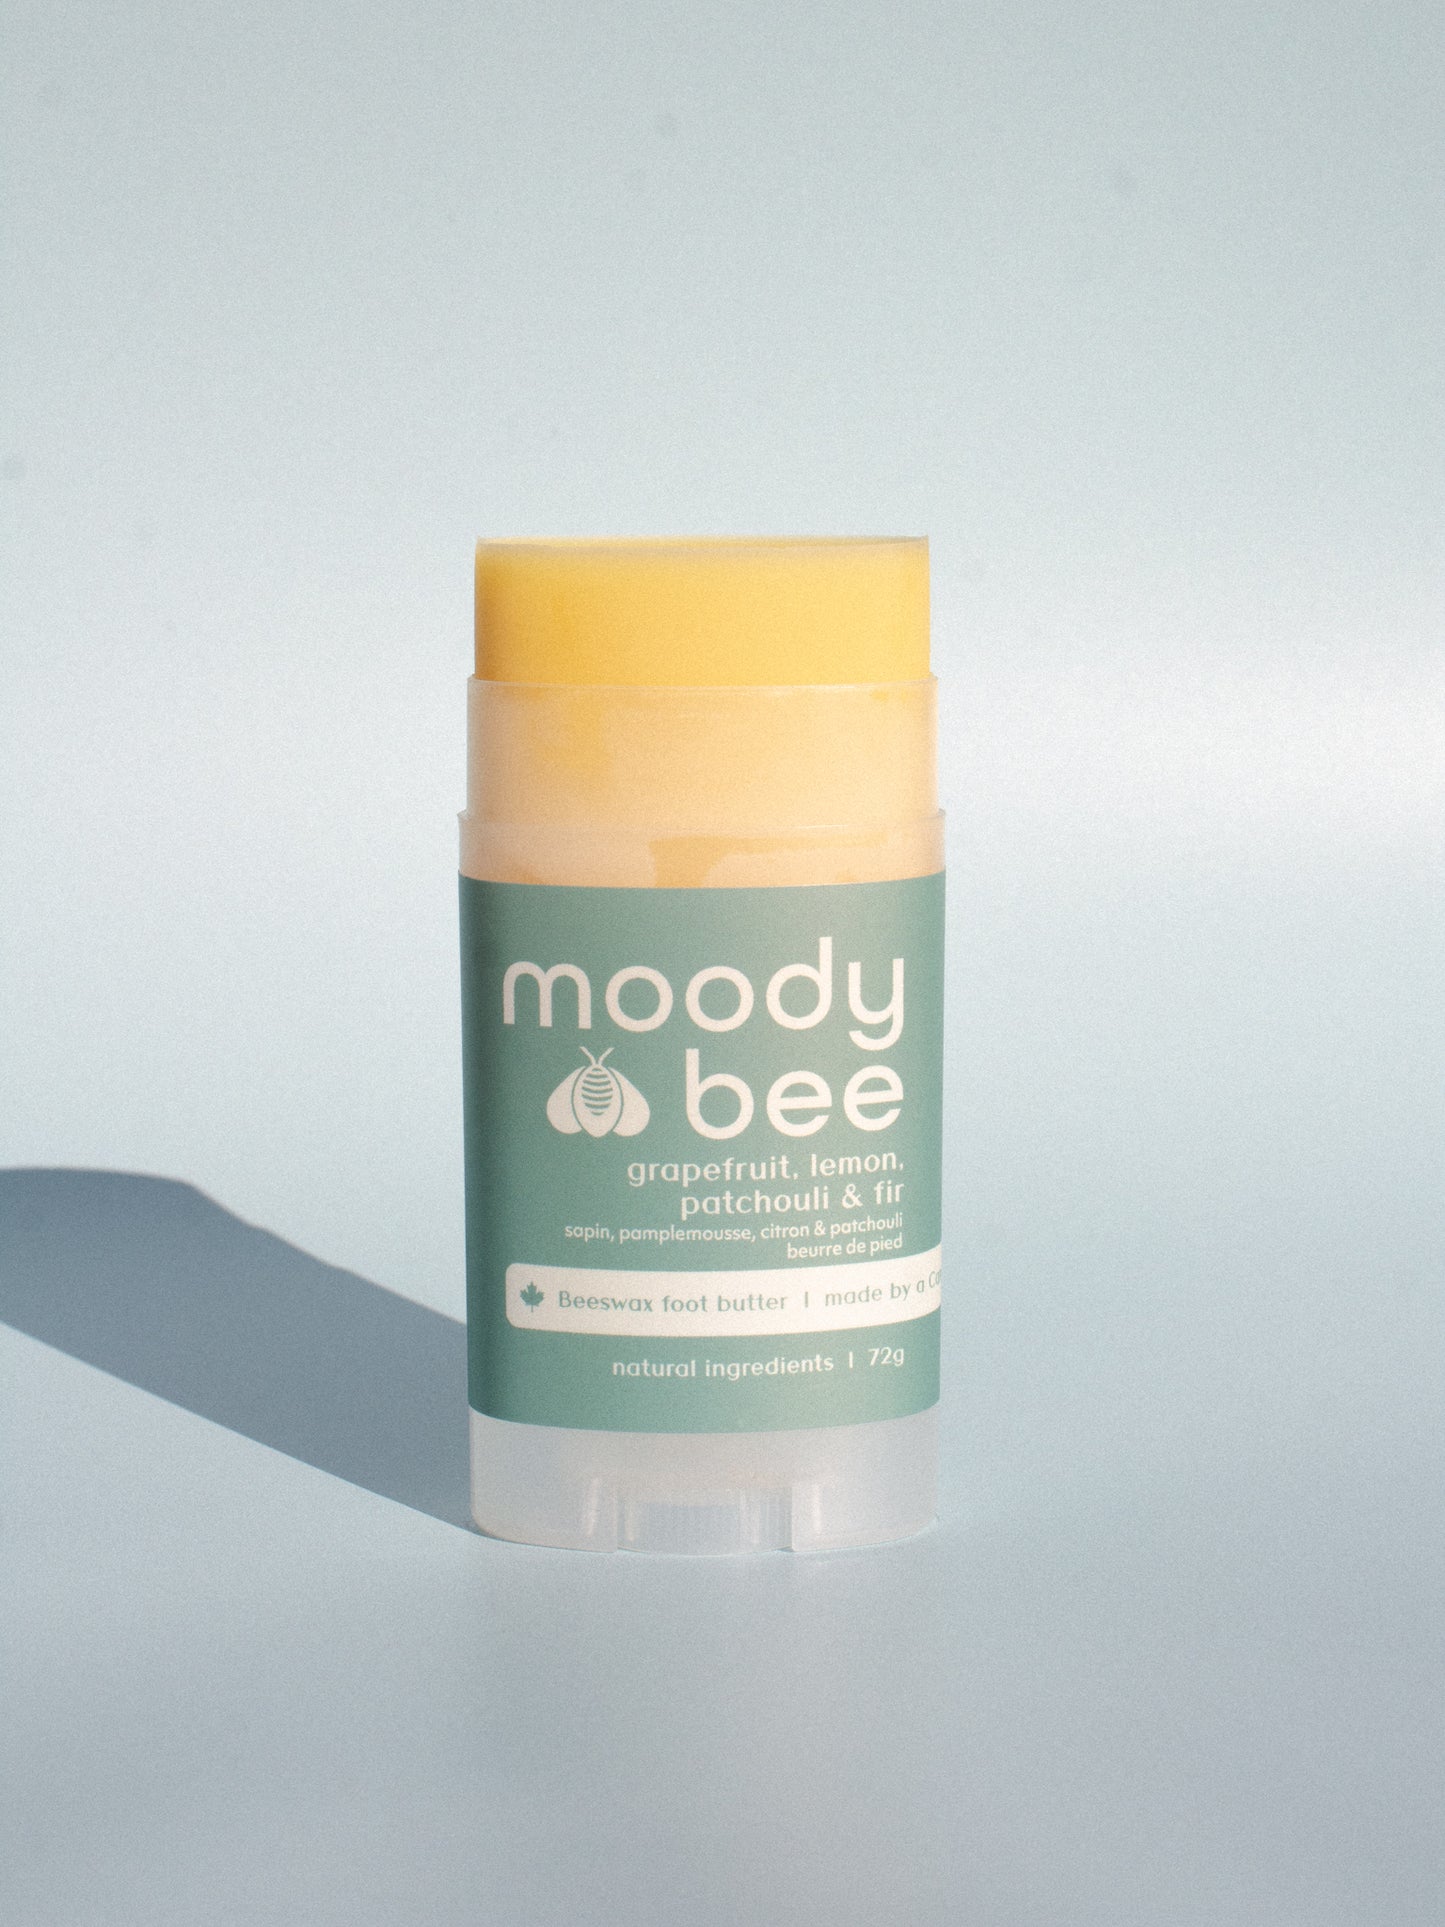 beeswax foot butter (both sizes now ship free)